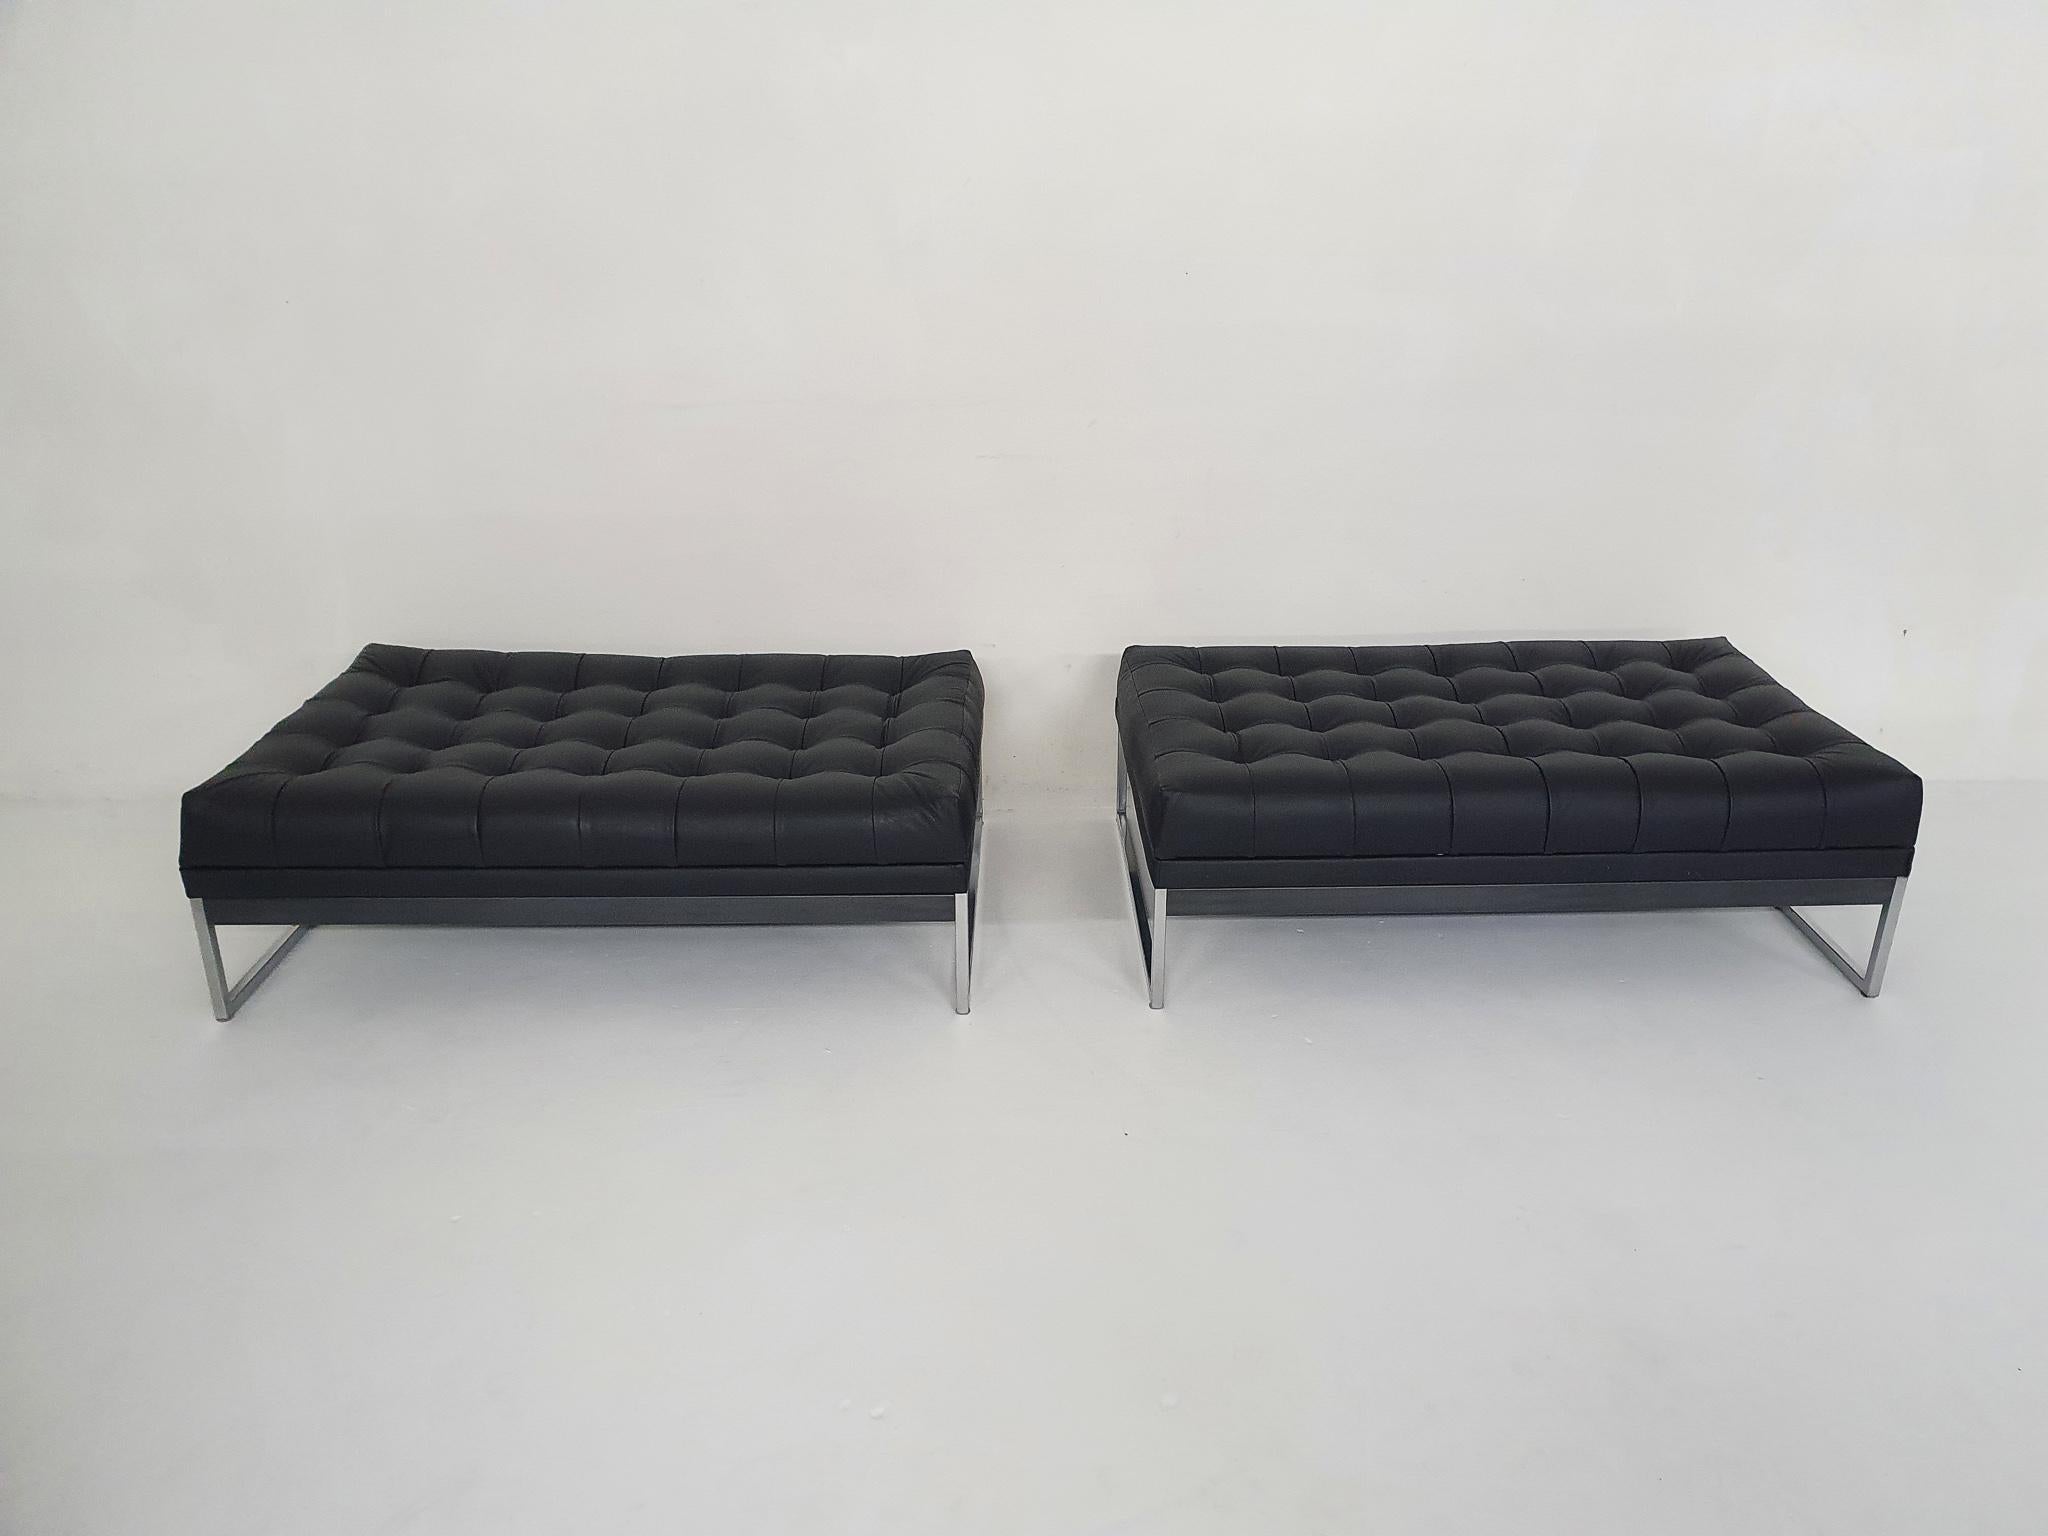 Dutch Set of Two Benches by AP-Originals, the Netherlands, 1960's For Sale